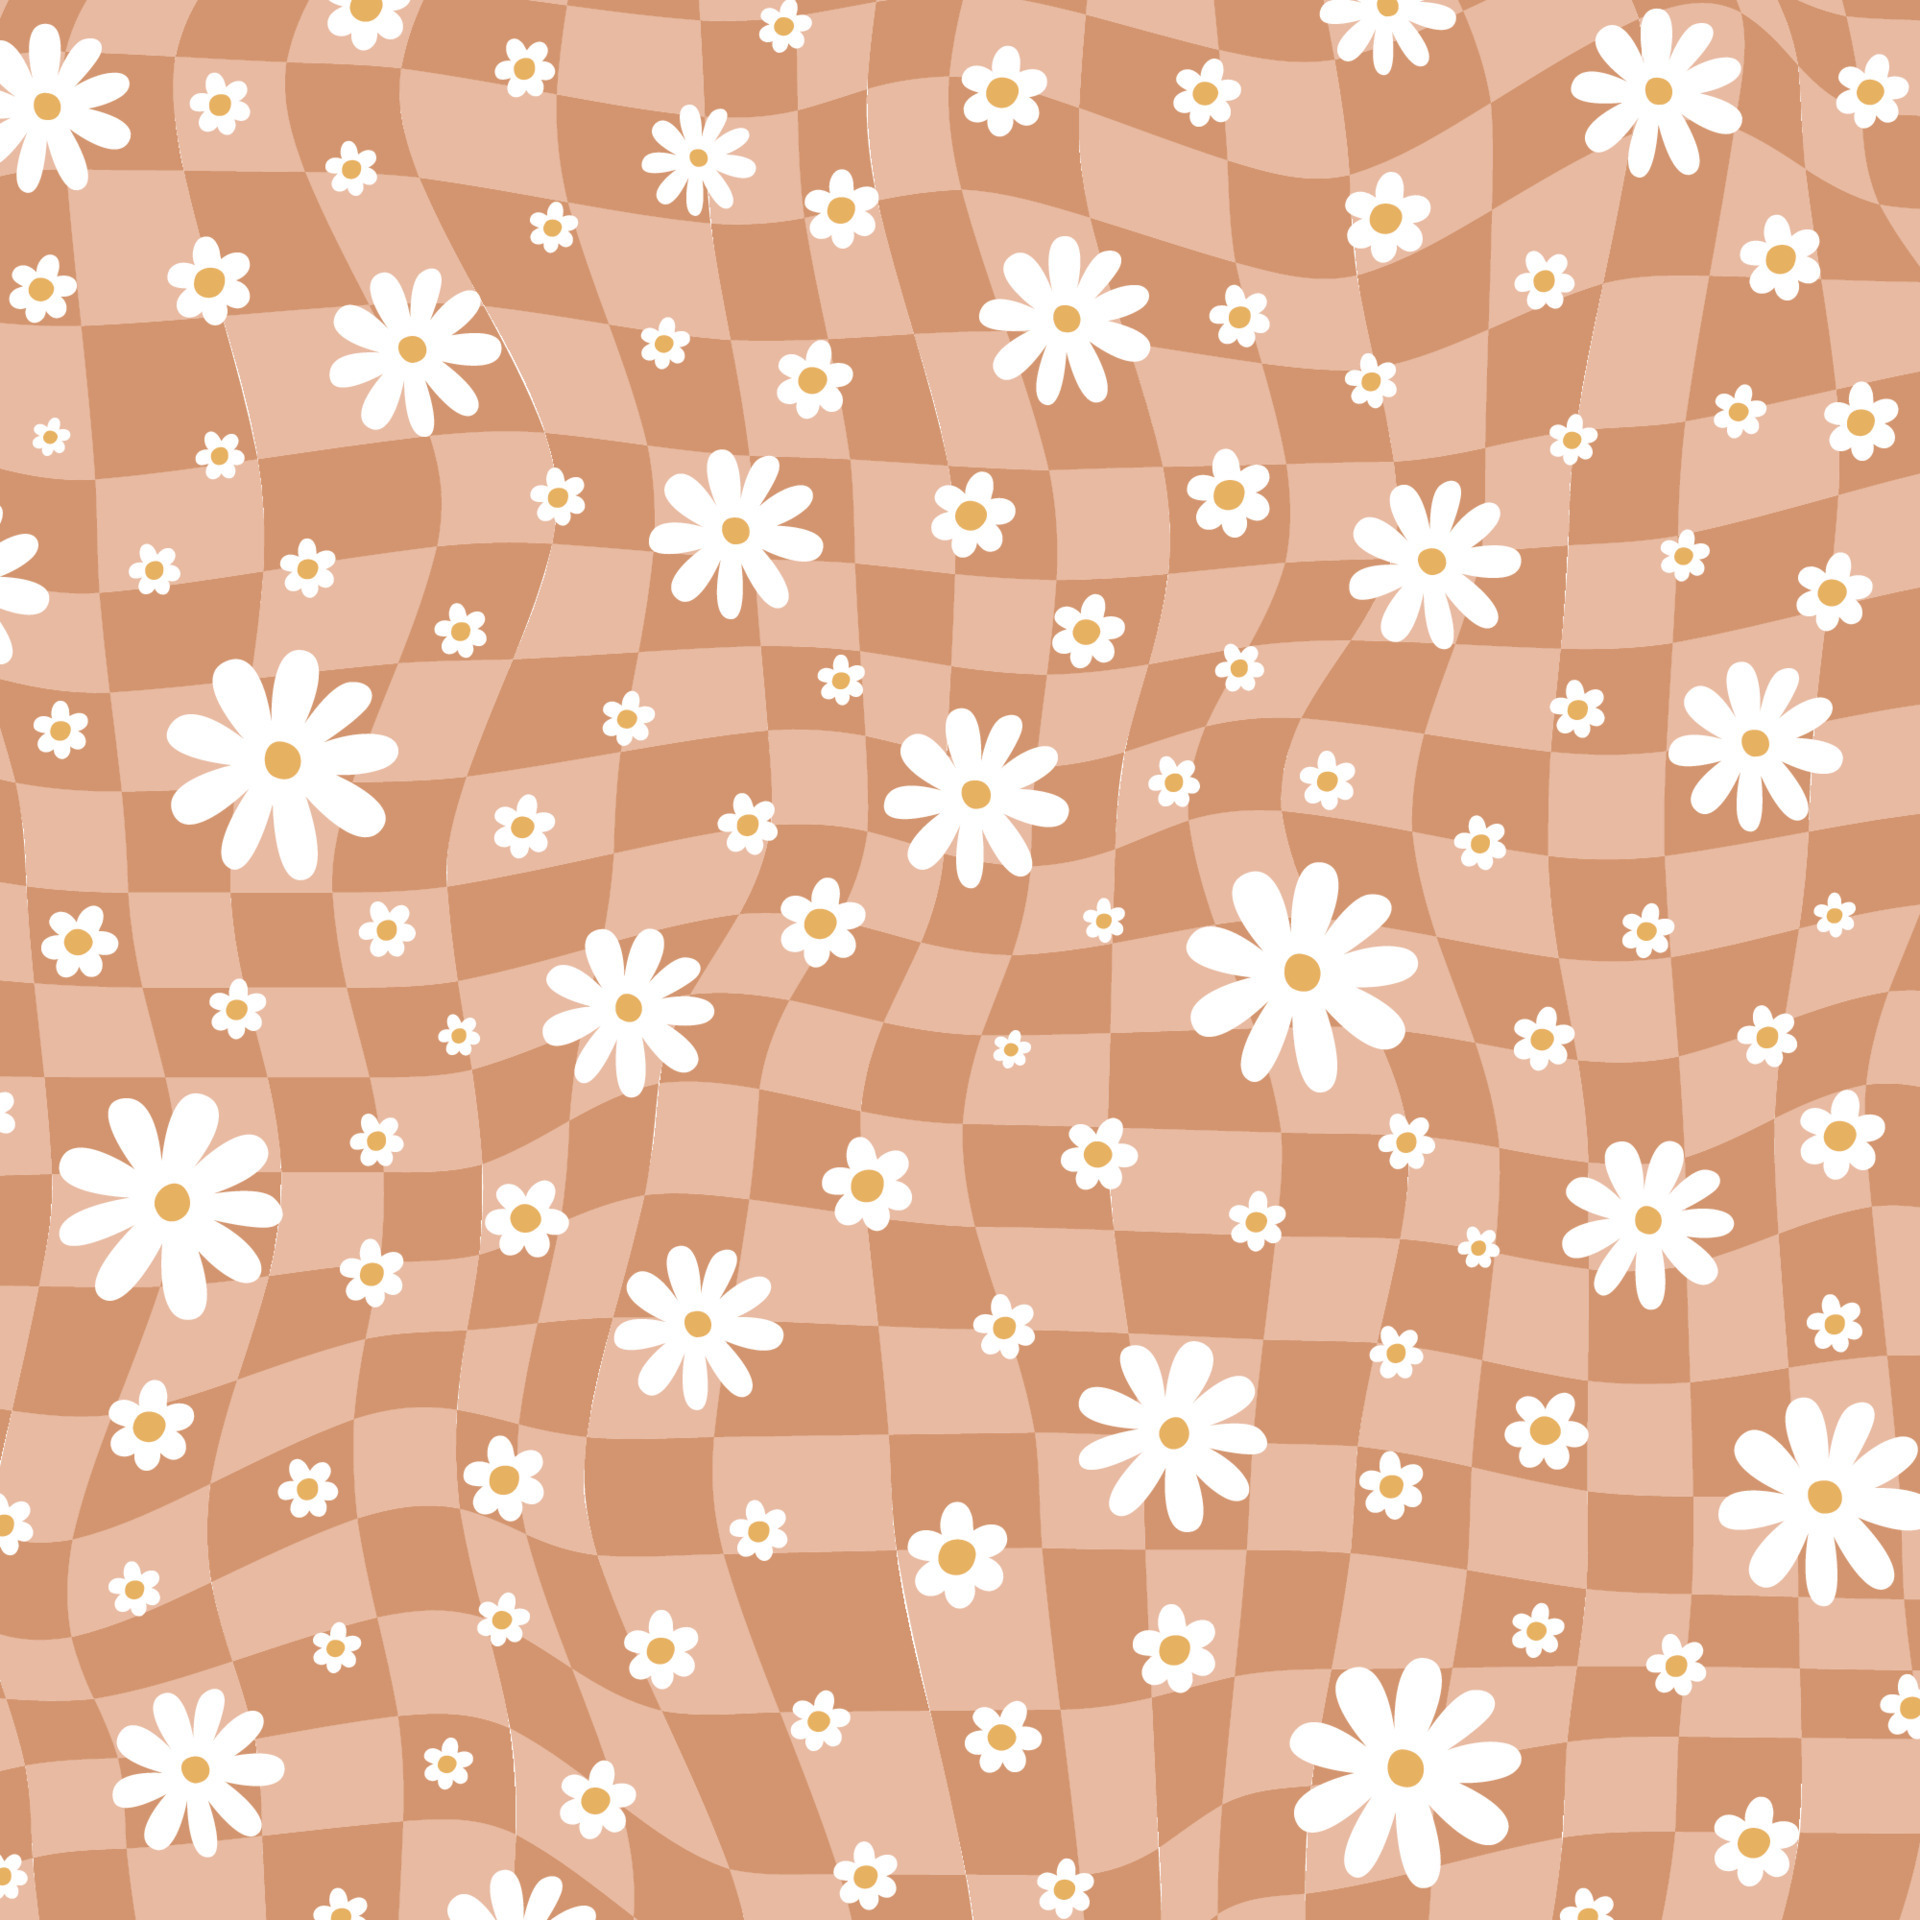 70s Floral Daisy Fabric Wallpaper and Home Decor  Spoonflower